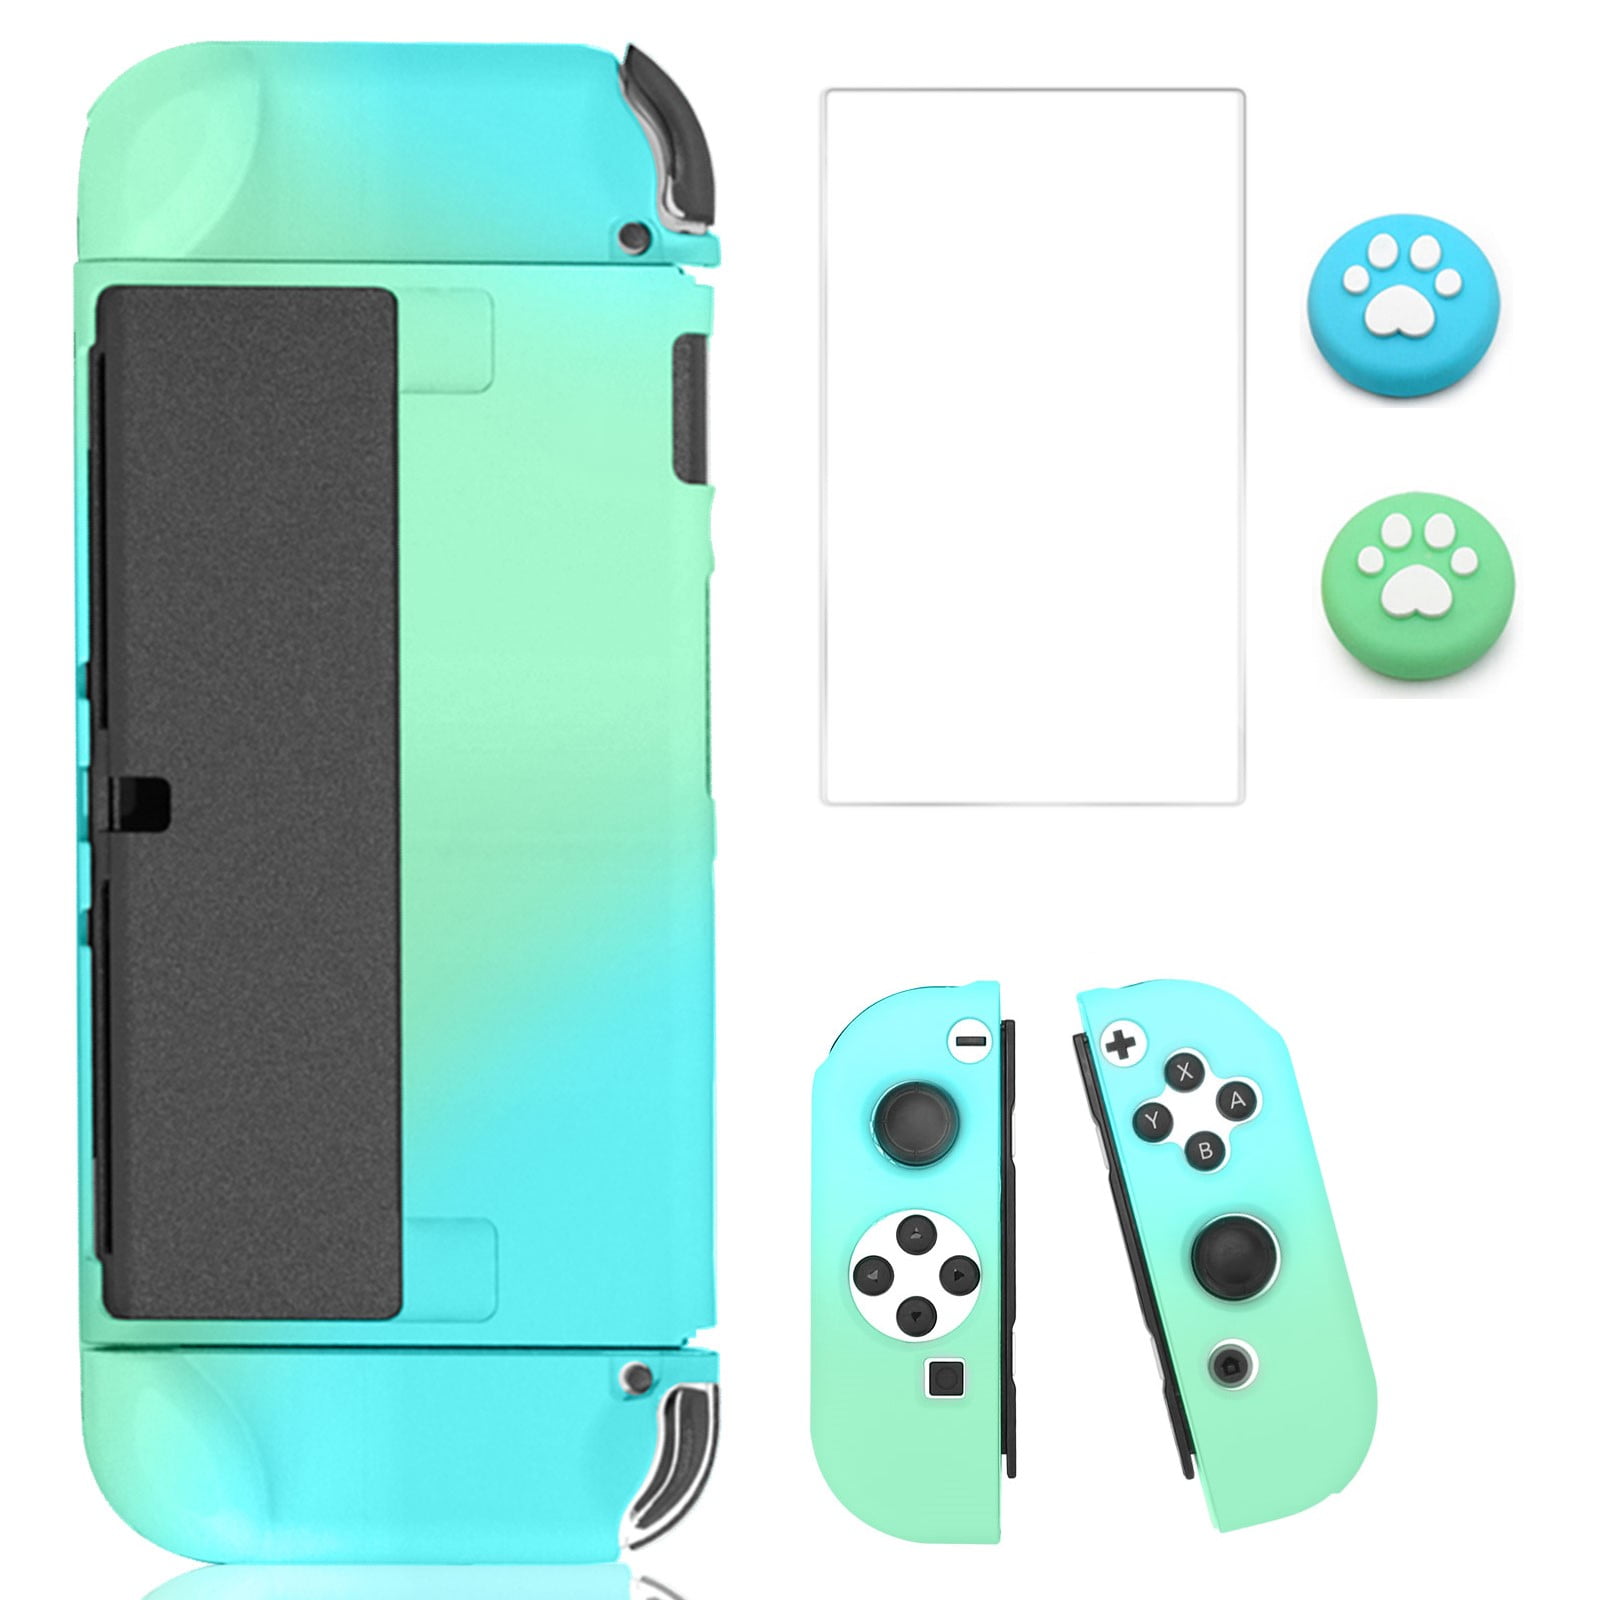 Case Cover Set Fit for Nintendo Switch OLED, EEEkit Protective Cover Protector Case Compatible Nintendo Switch OLED Console w/Shock-Absorption & Anti-Scratch Design, NS OLED Accessories